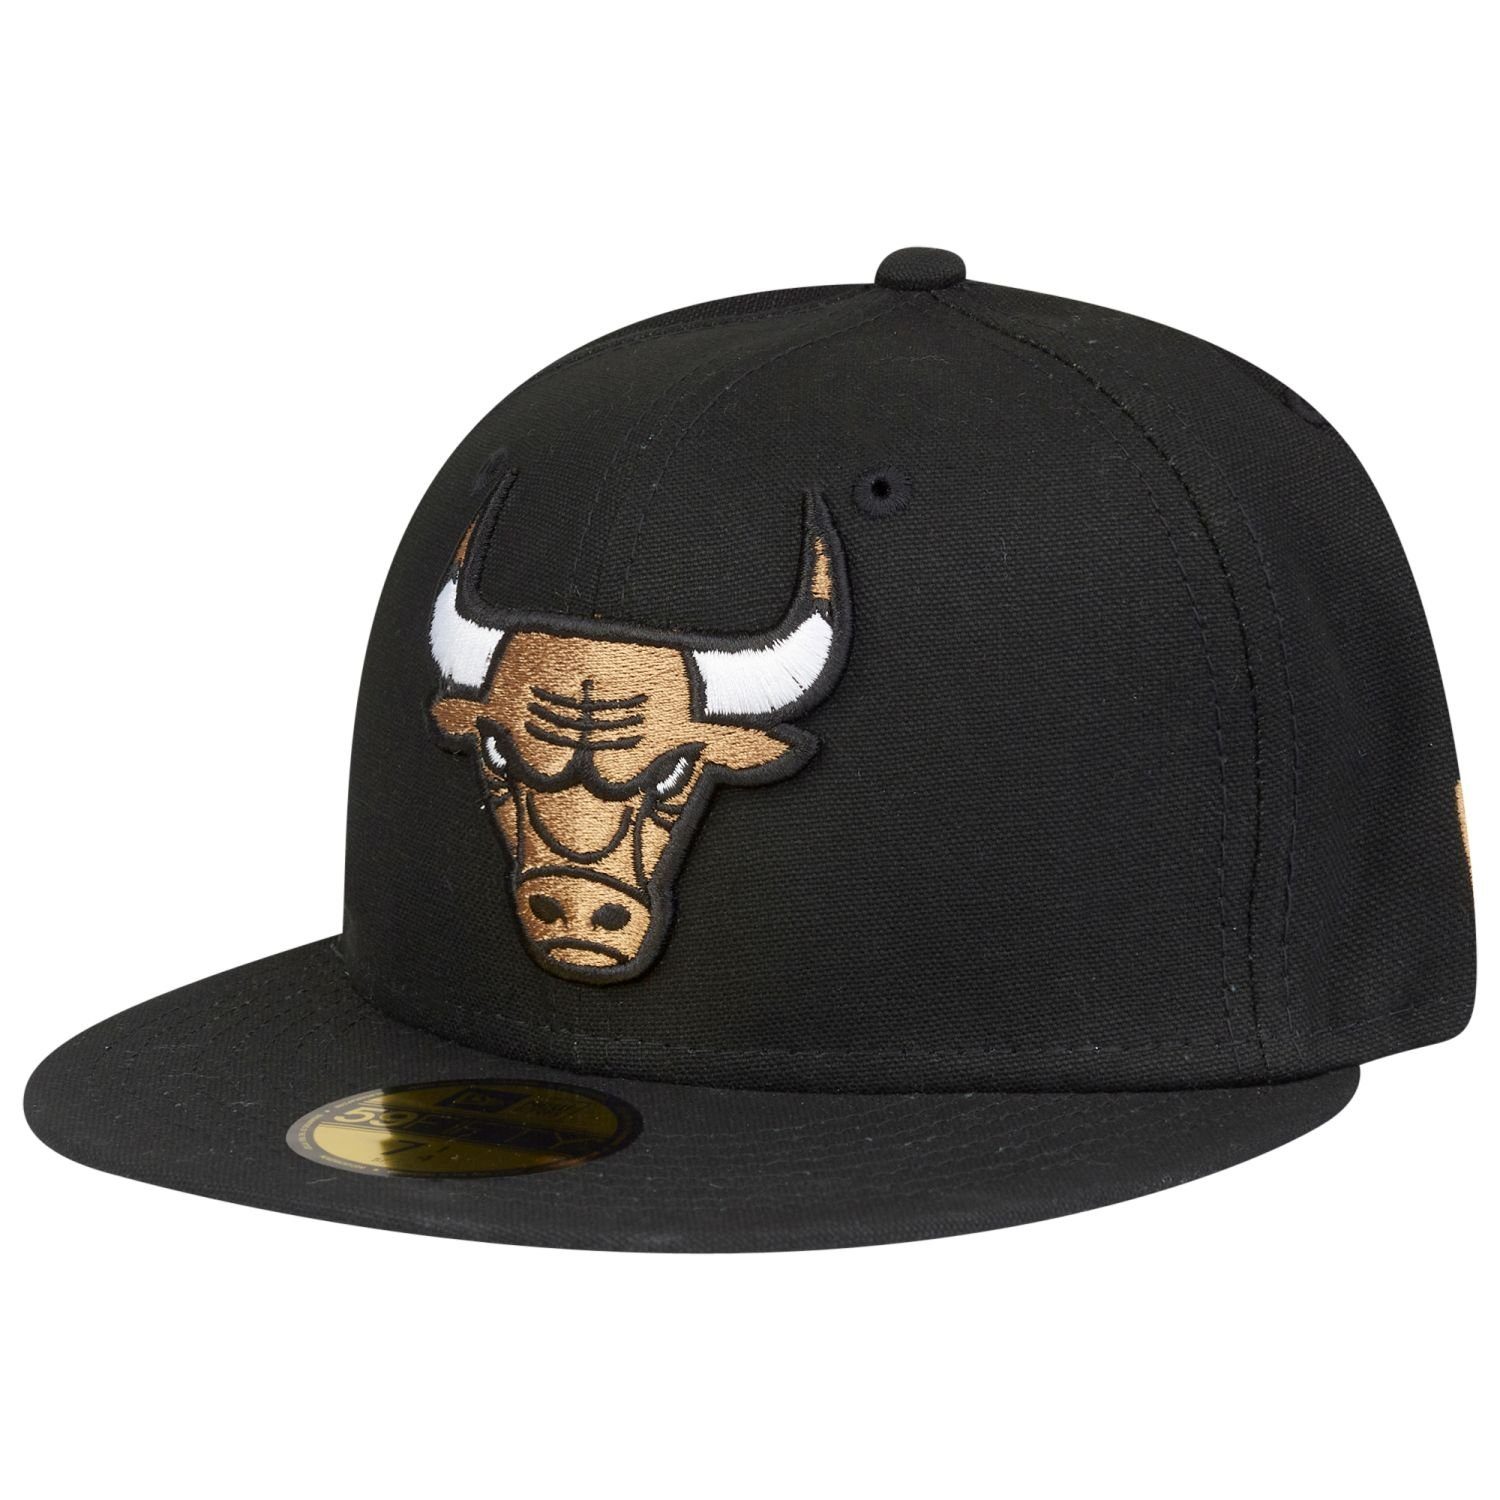 Bulls 59Fifty Chicago Era Fitted New Cap CHAMPIONS